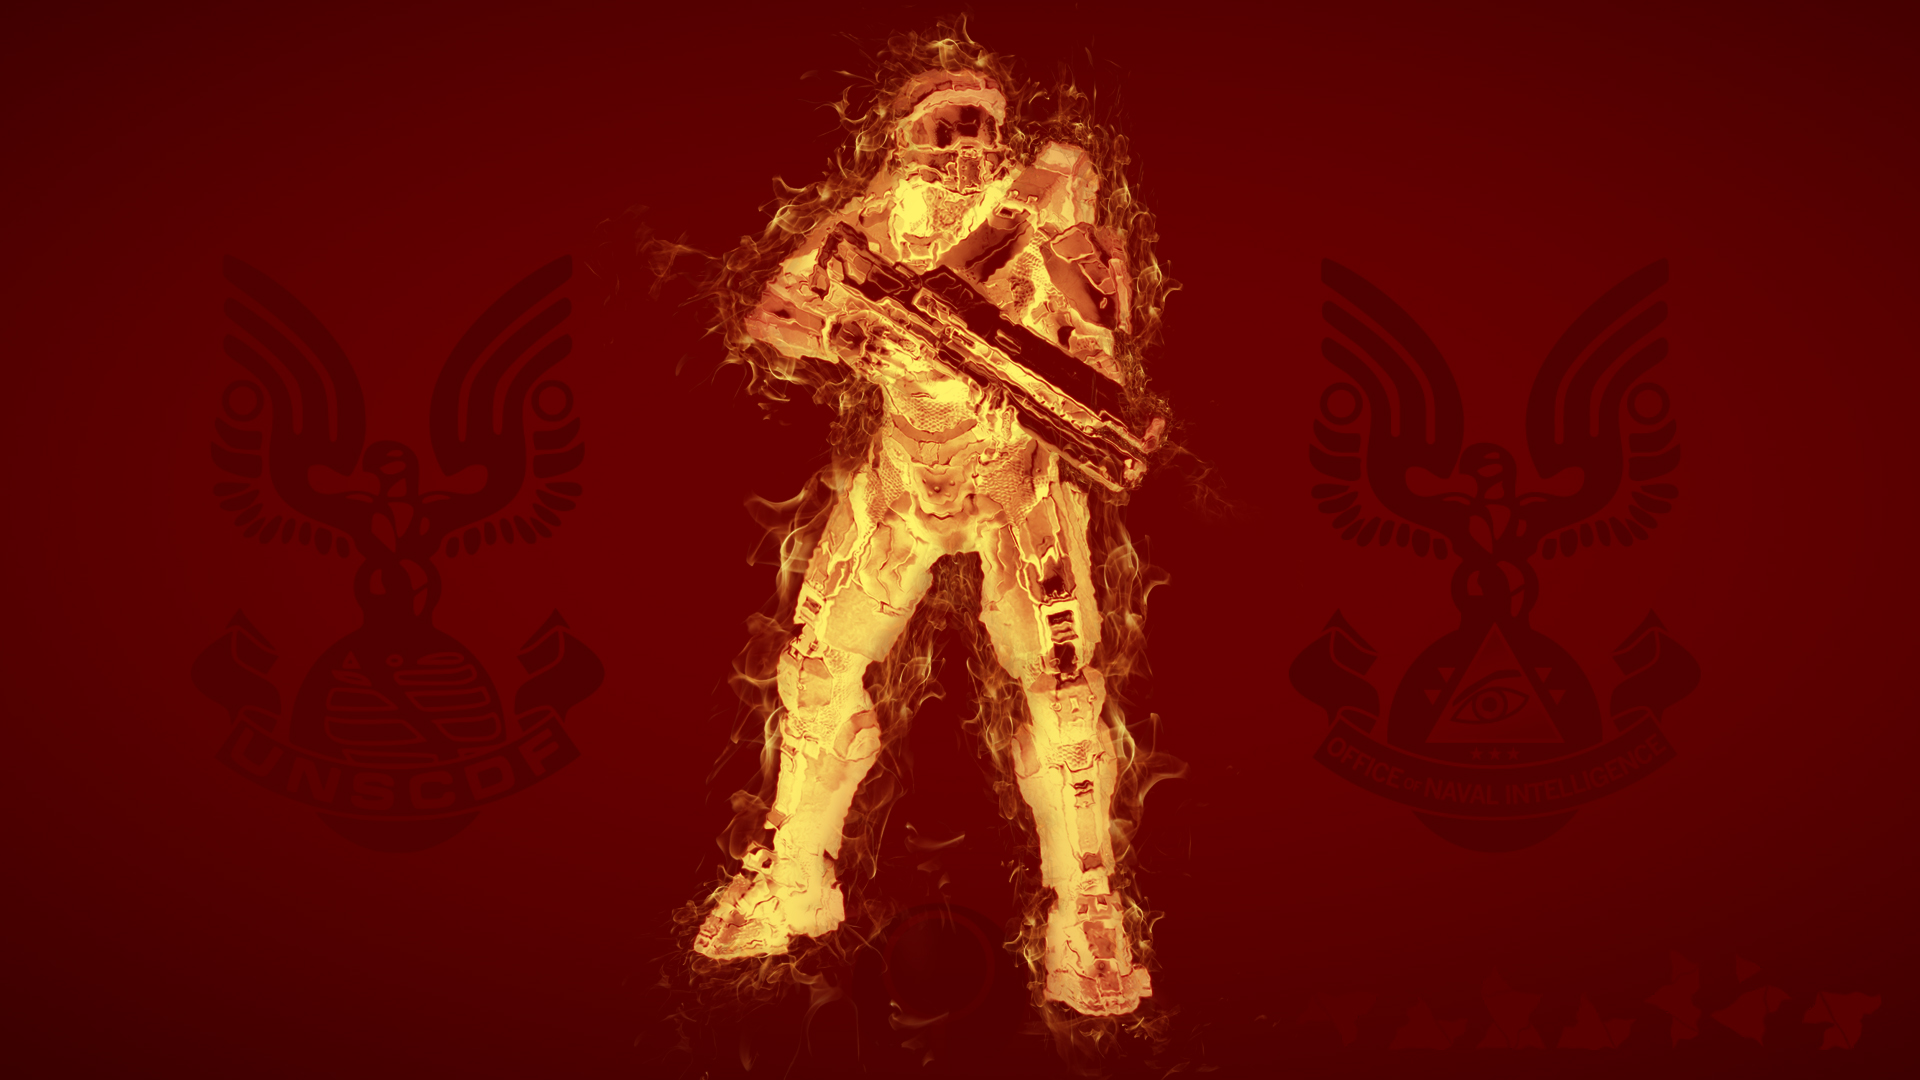 General 1920x1080 Halo (game) Halo 4 video games red fire Spartans (Halo) Master Chief (Halo) red background DeviantArt video game art video game characters